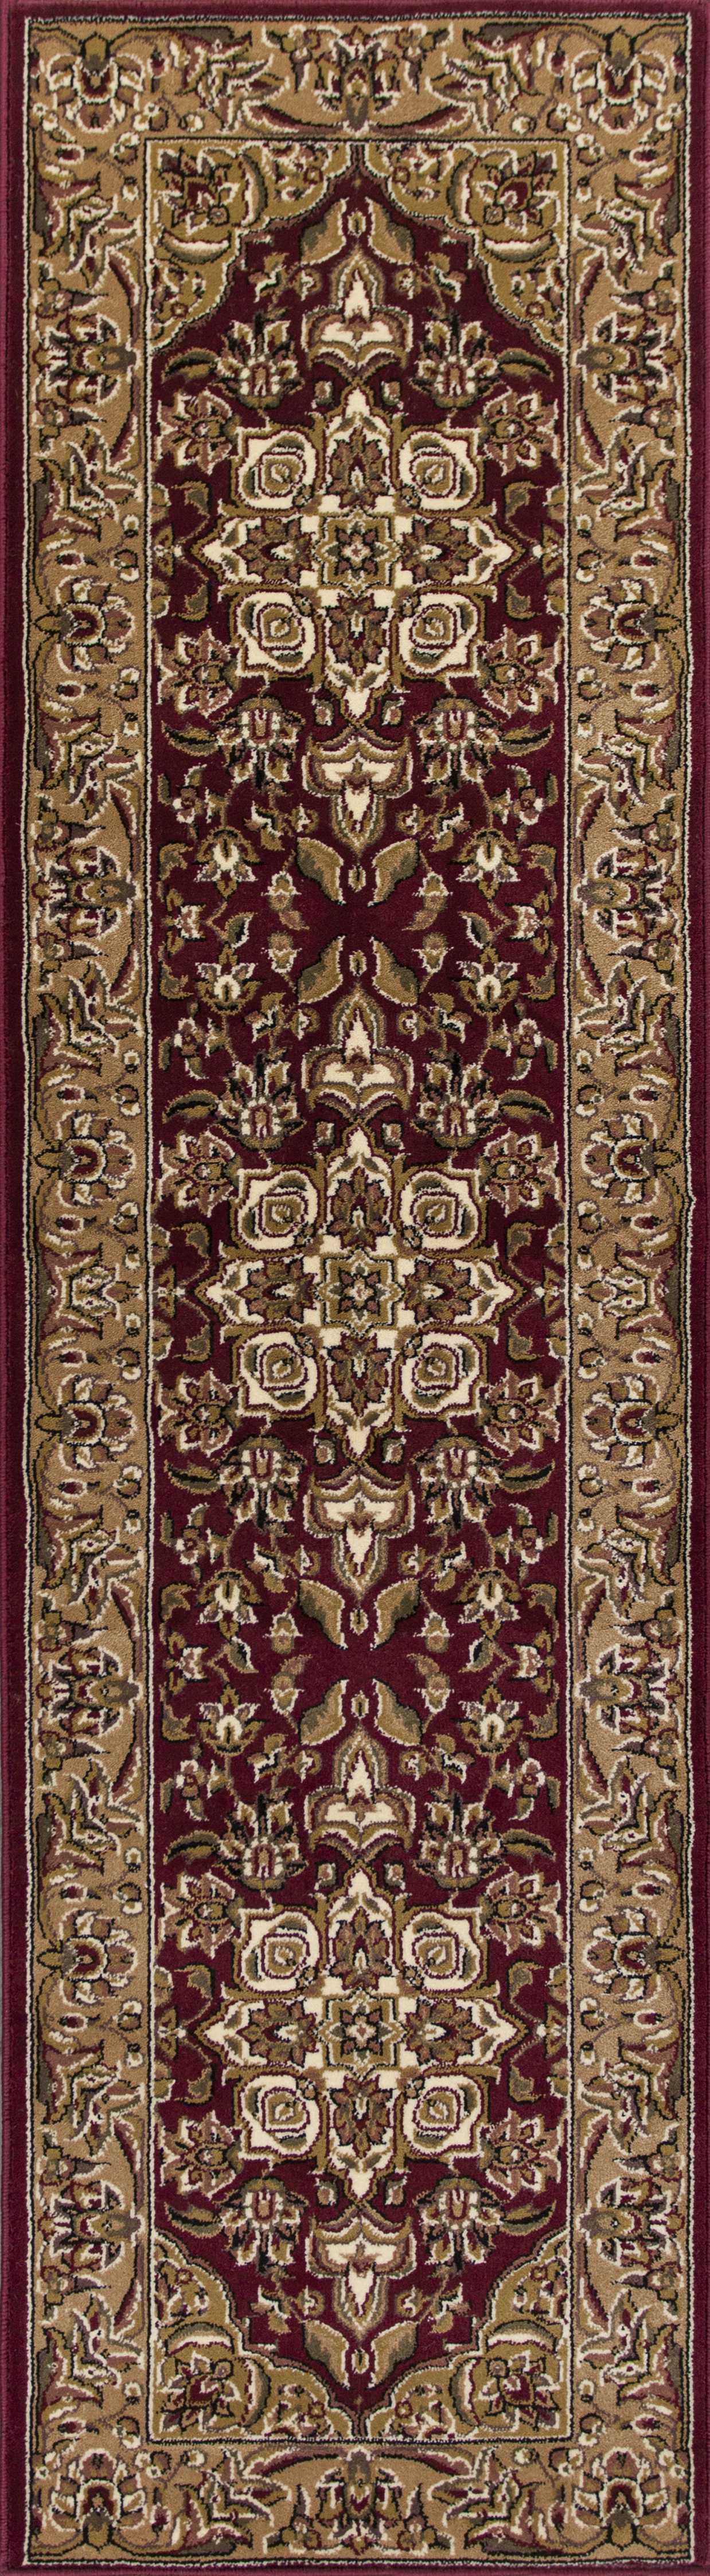 8' Red And Beige Area Rug-352870-1